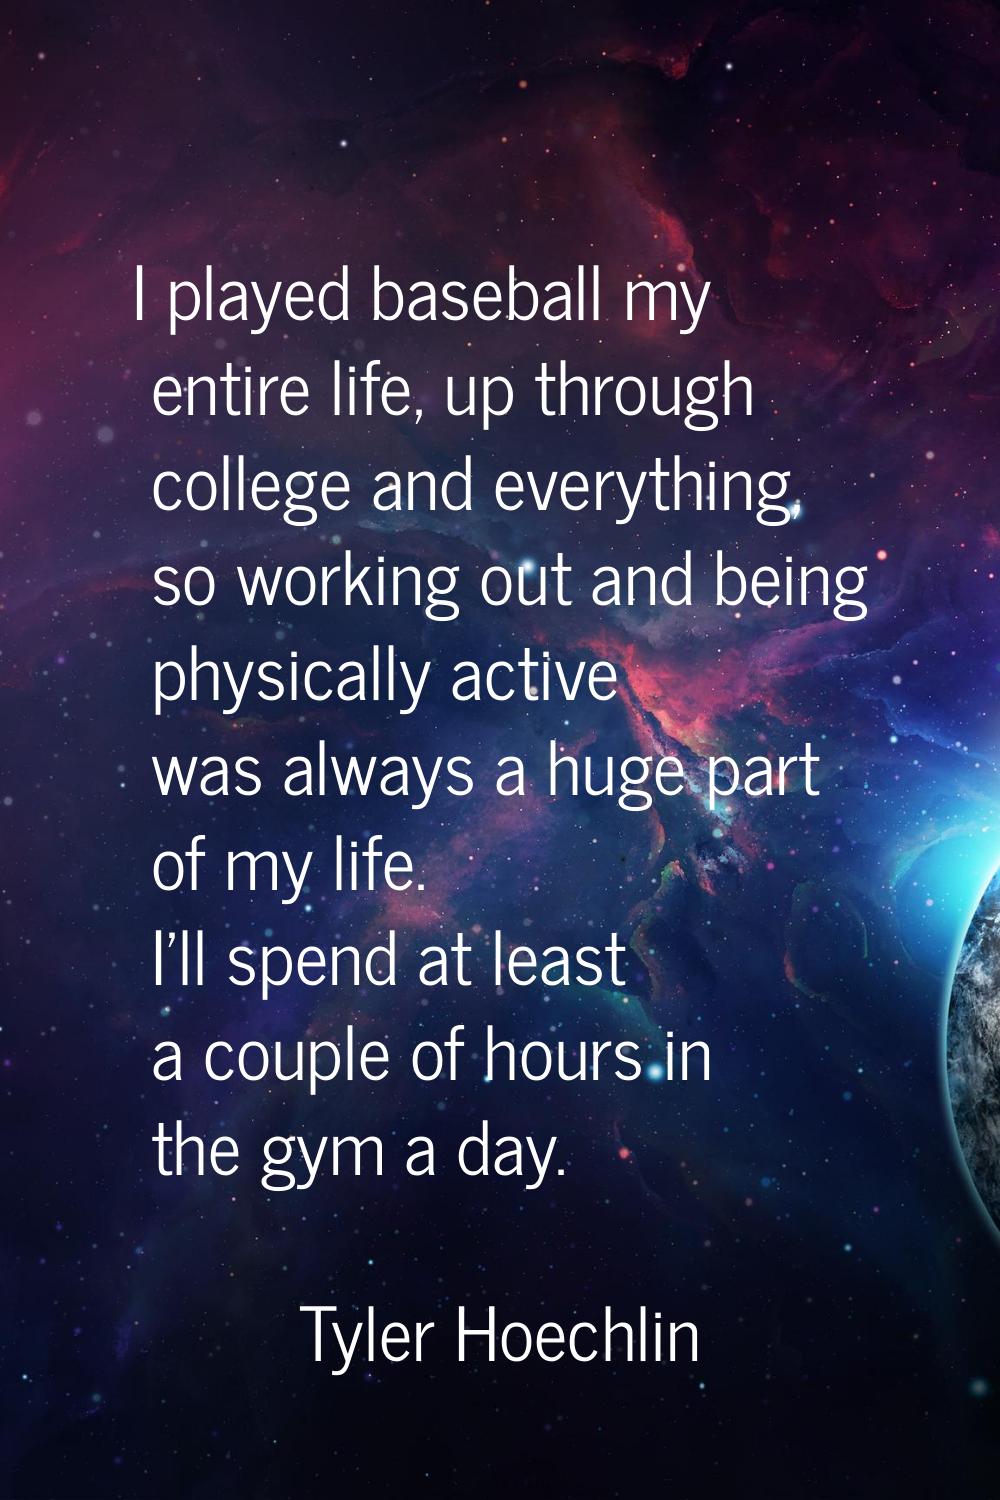 I played baseball my entire life, up through college and everything, so working out and being physi